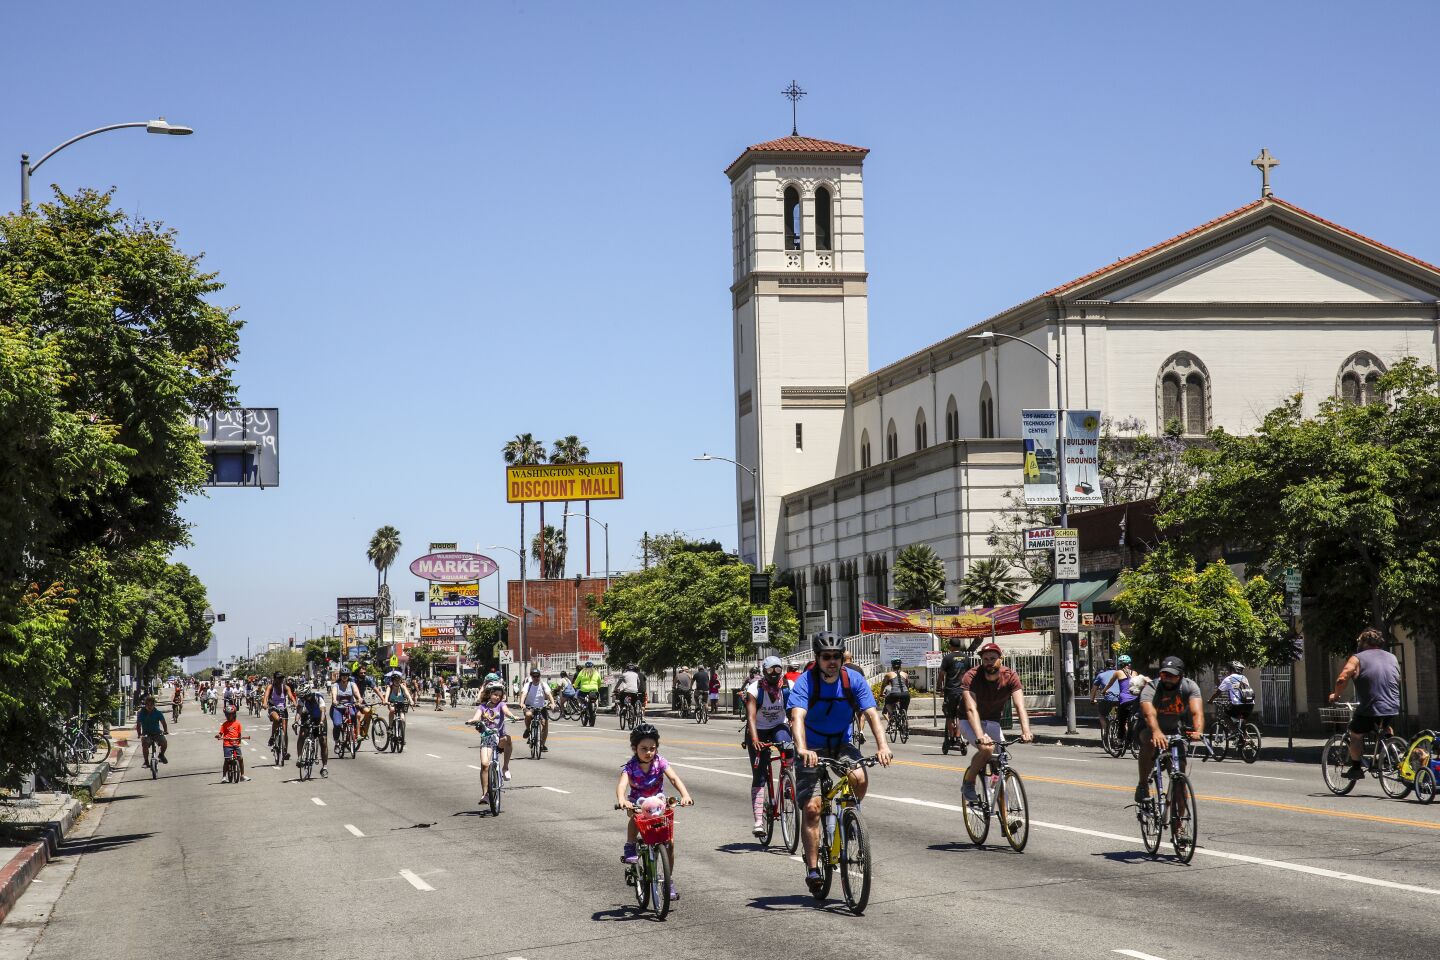 LOS ANGELES, CA--JUNE 30, 2019--The scene along Washington Boulevard, near Crenshaw, during a CicLAvia event in the West Adams neighborhood of Los Angeles, CA, photographed June 30, 2019. (Jay L. Clendenin / Los Angeles Times)